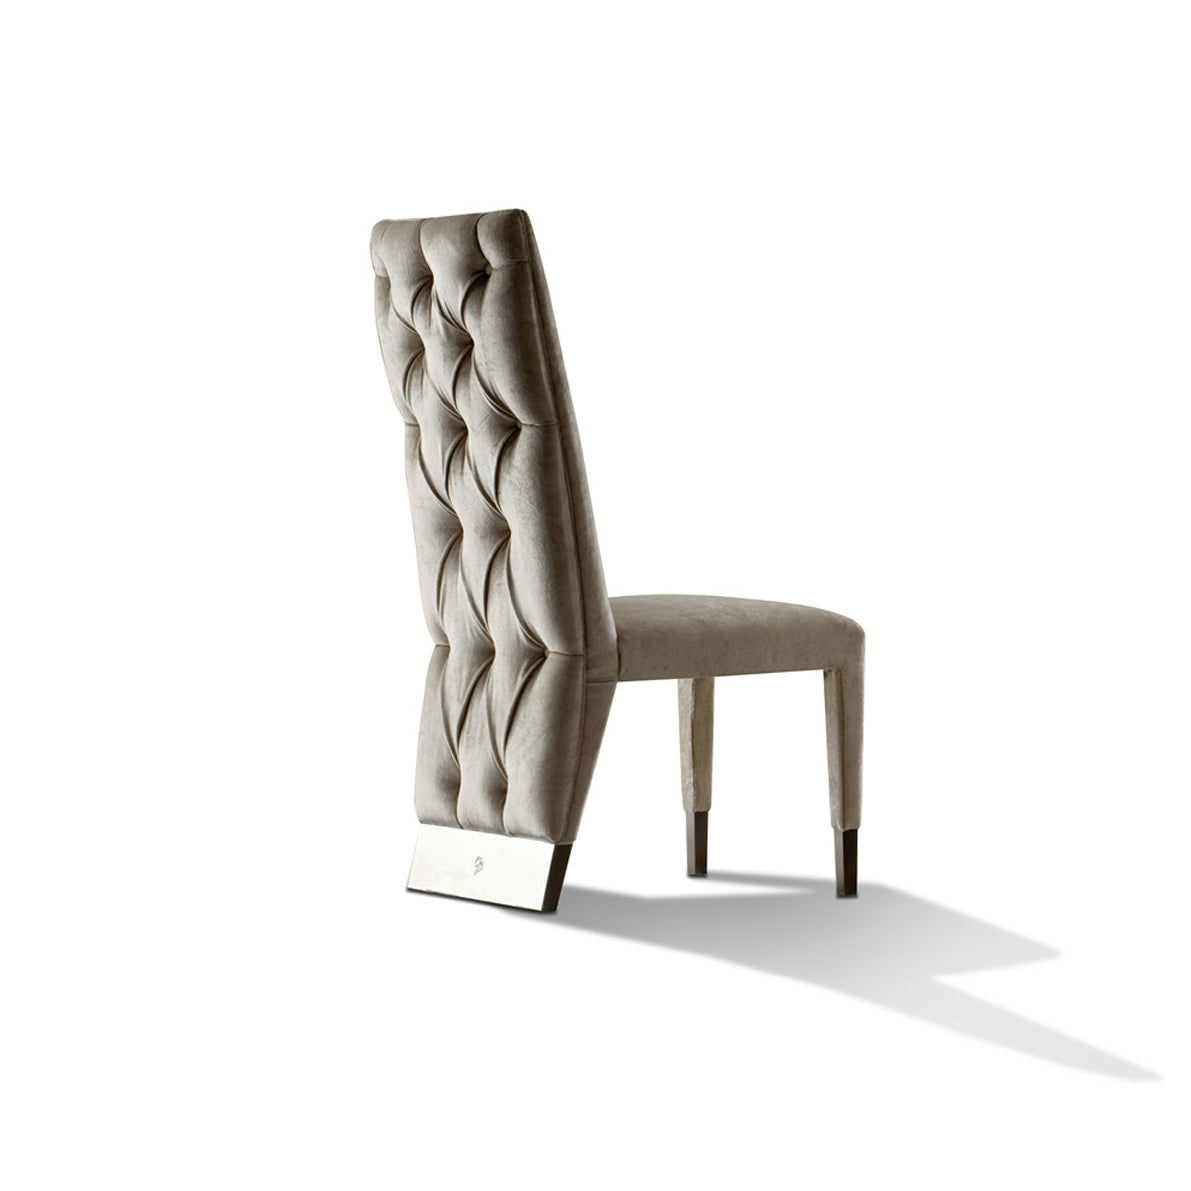 Lifetime dining chair